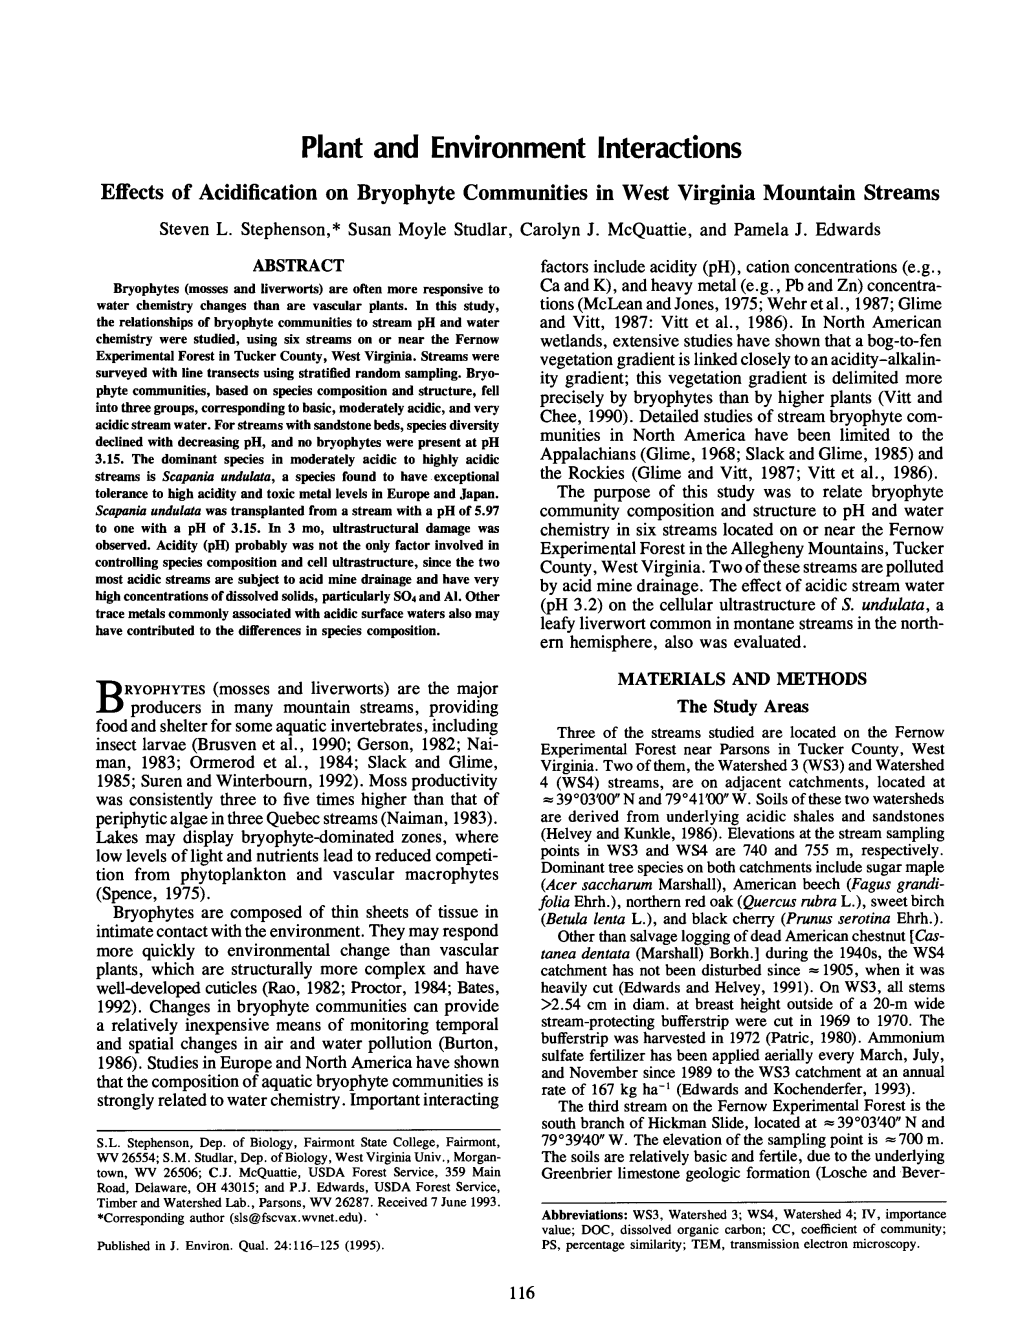 Effects of Acidification on Bryophyte Communities in West Virginia Mountain Streams